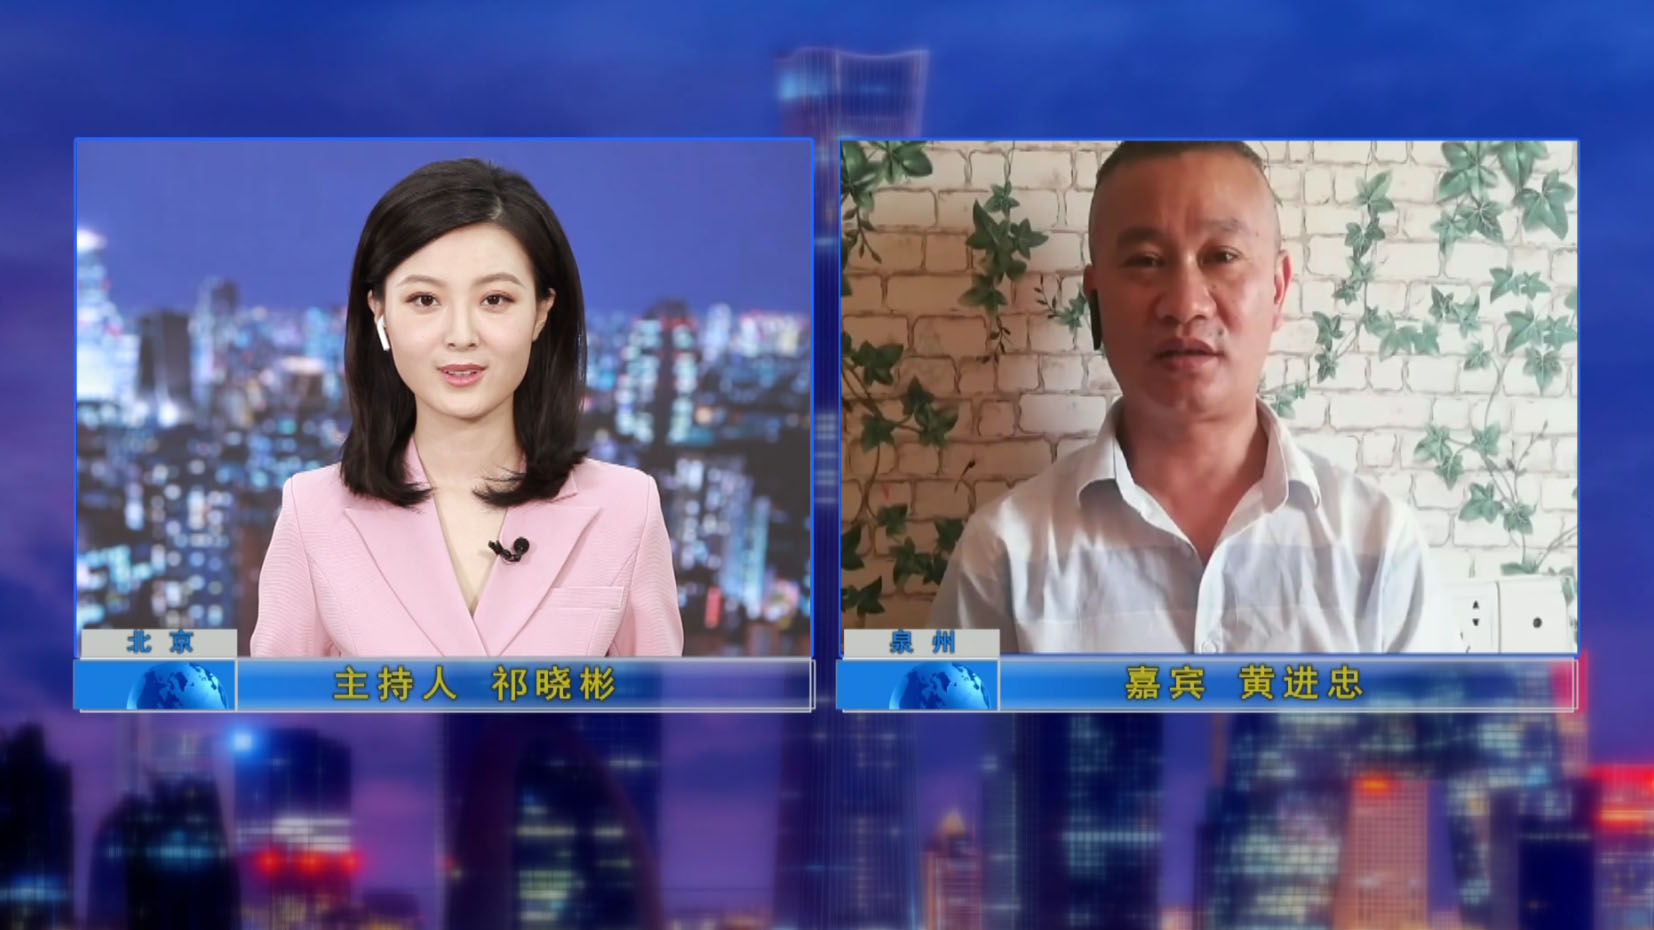 The general manager was interviewed by the TV program "Credit China"